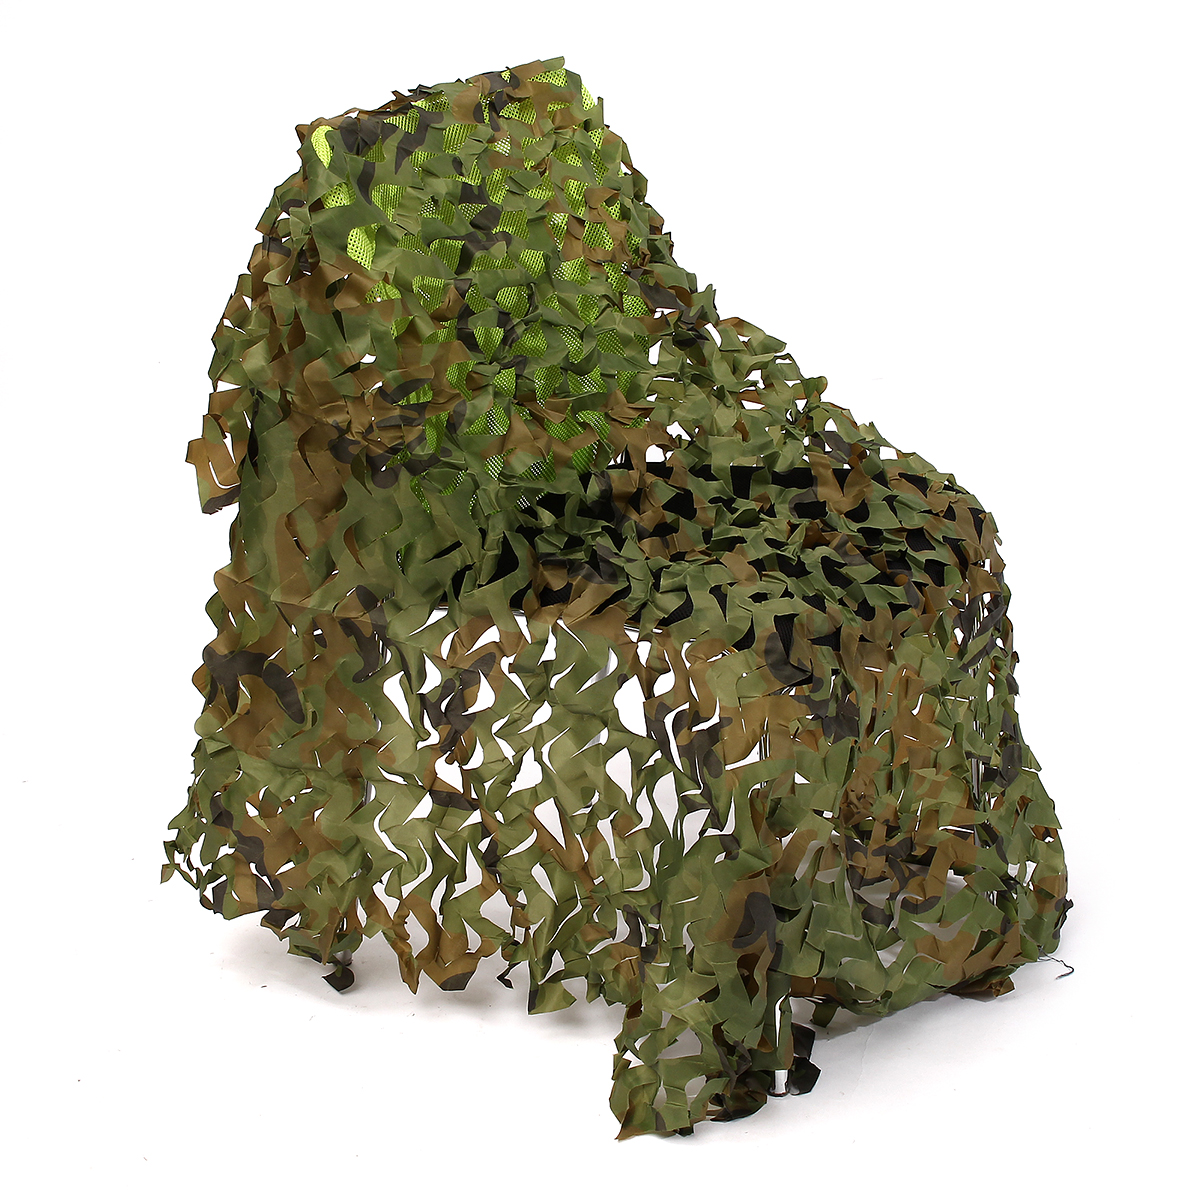 1Mx1.5M Camo Netting Camouflage Net for Car Cover Camping Woodland Military Hunting Shooting